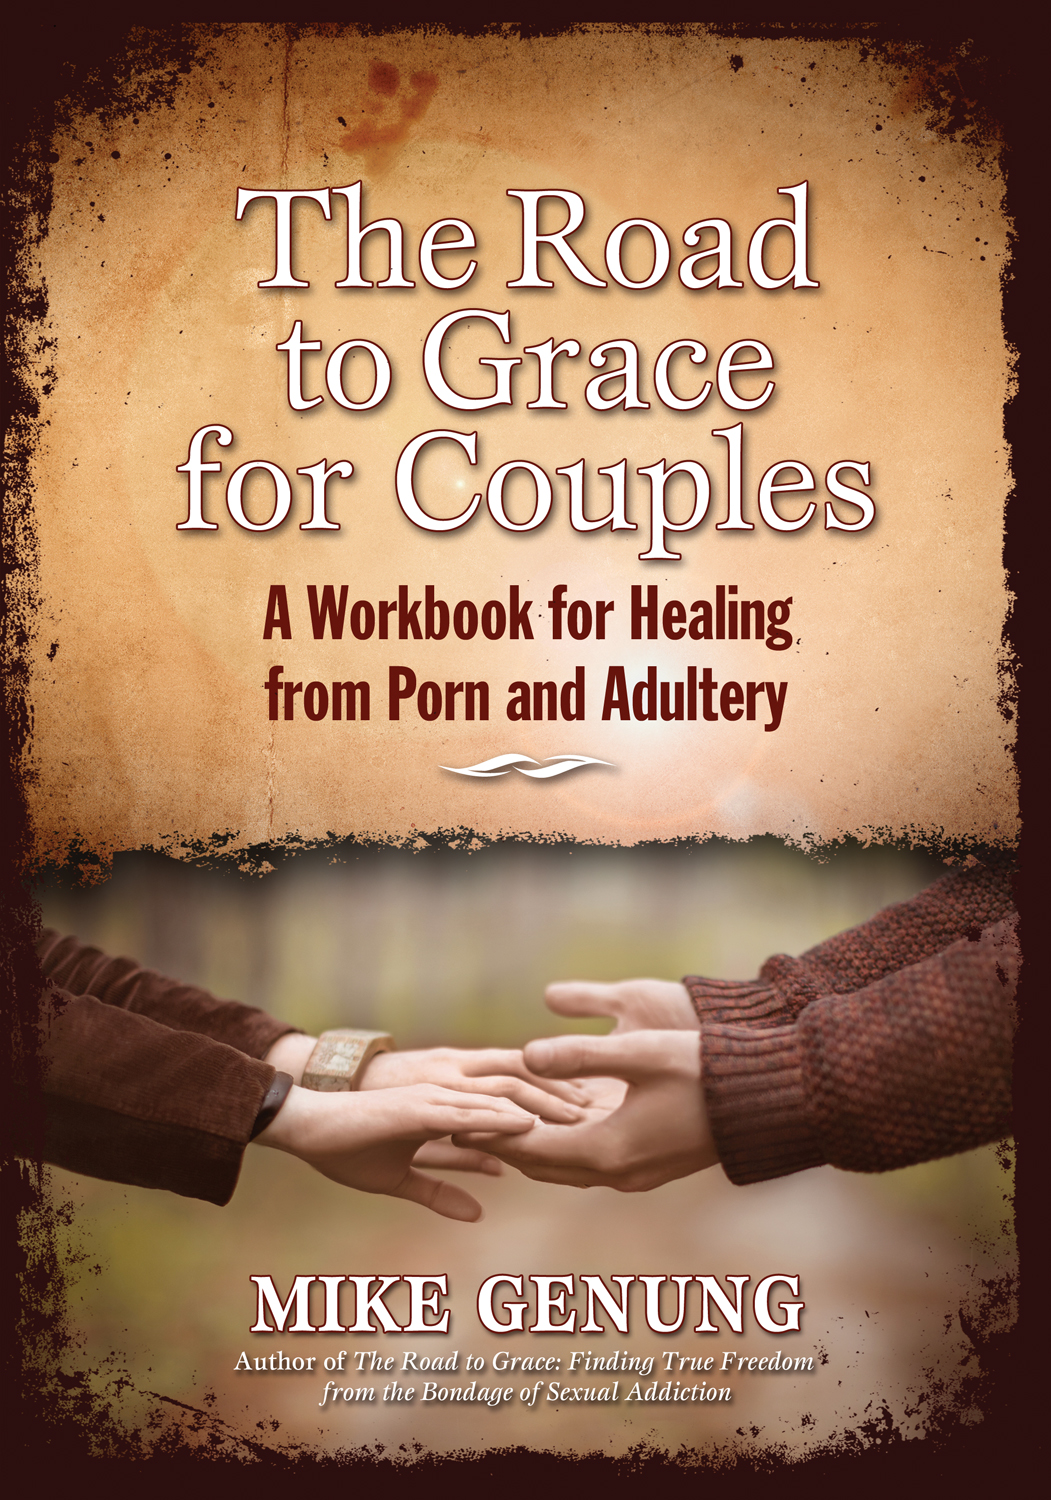 The Road to Grace for Couples: A Workbook for Healing from Porn & Adultery